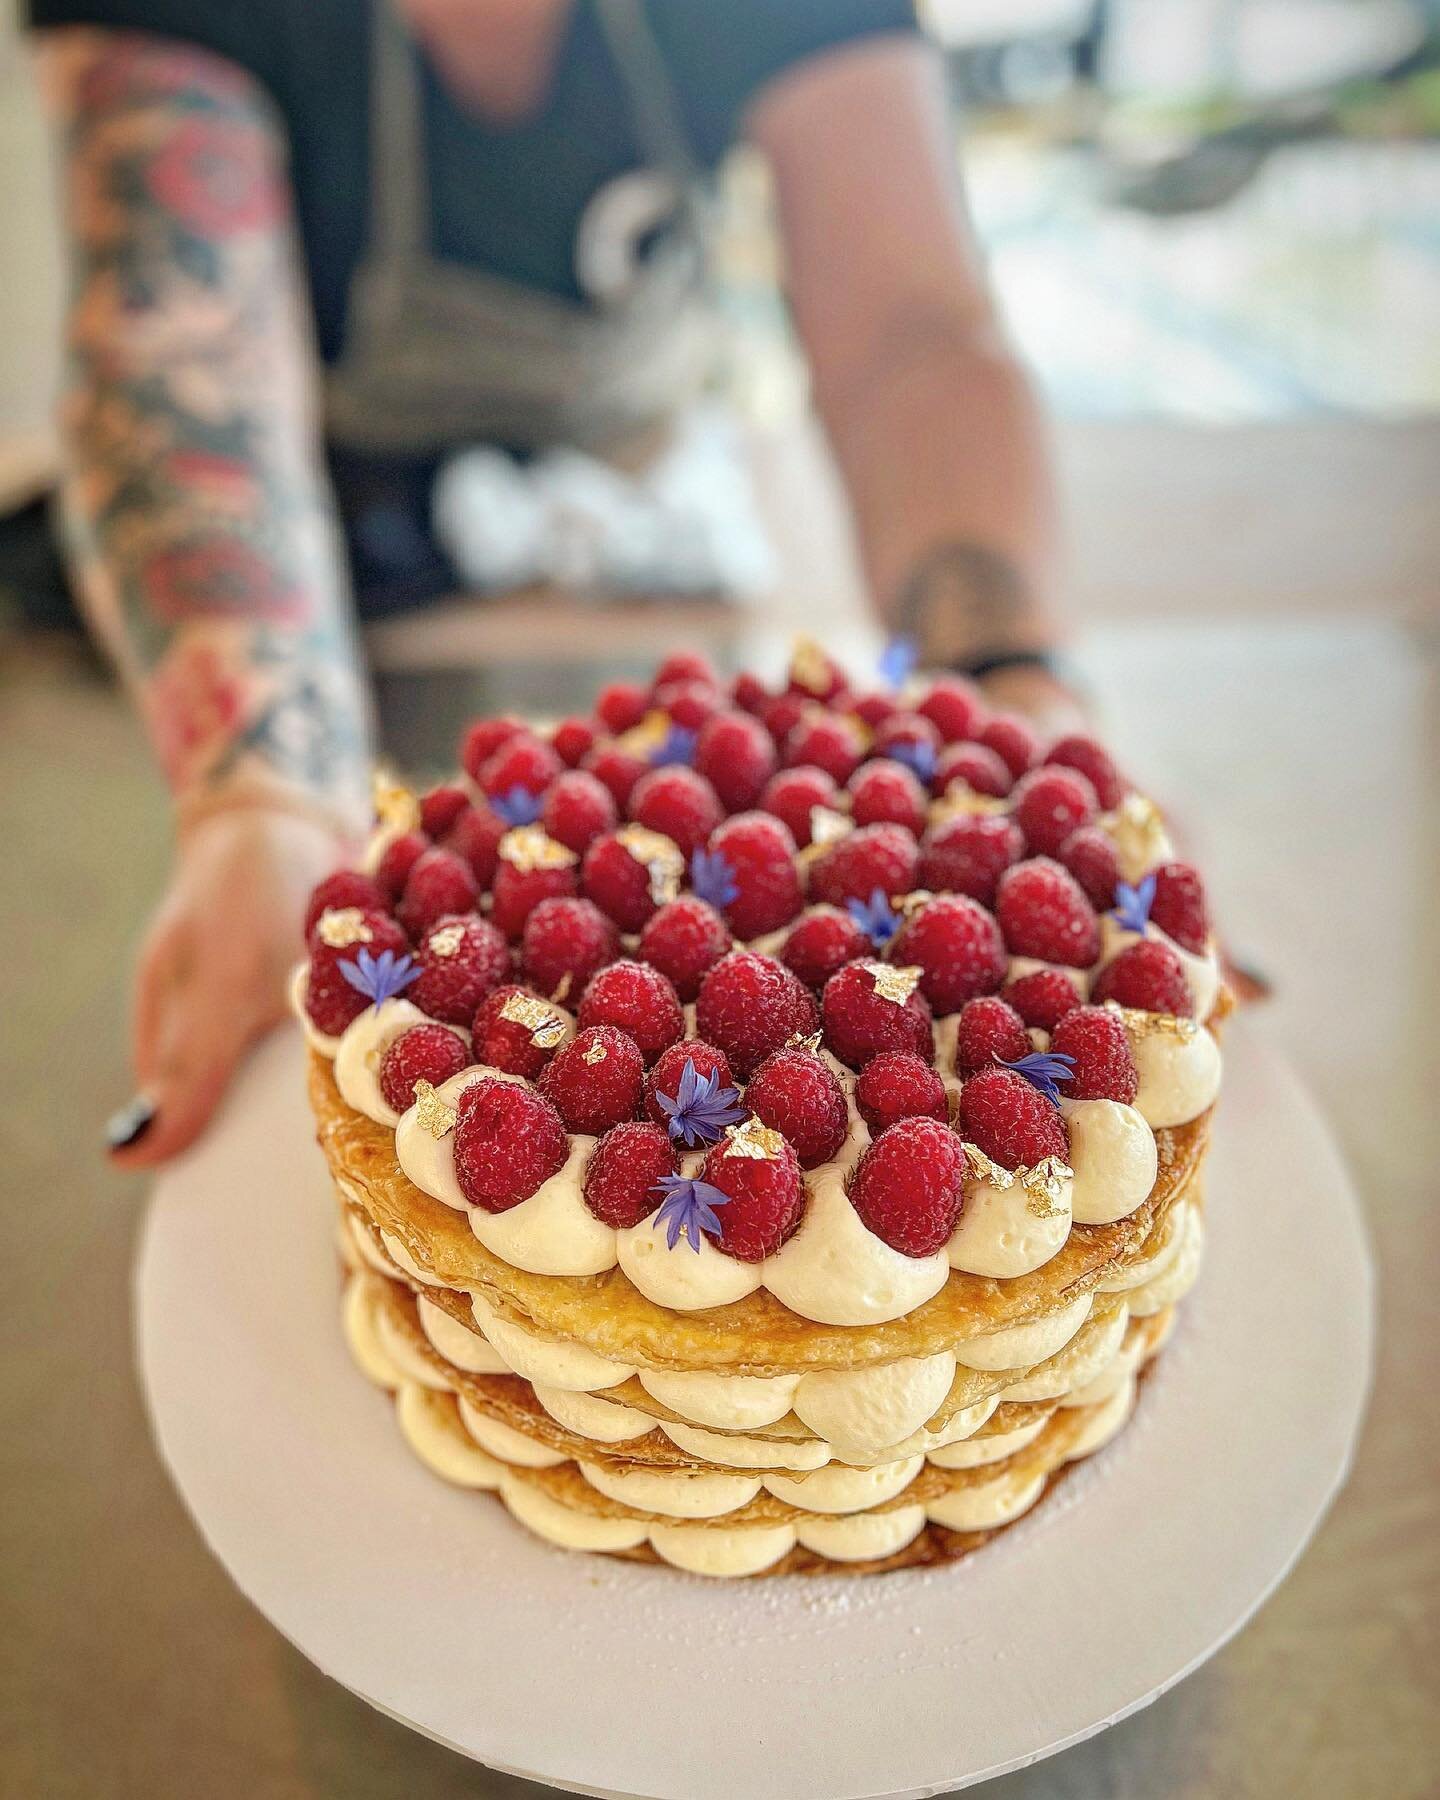 Raspberry Mille Feuille cake, a special request for a special couple 👌🏽✨🥂

Made by @lilithwaiheke 🤩

#waihekechef
#waiheke
#waihekeisland
#privatechef
#cake